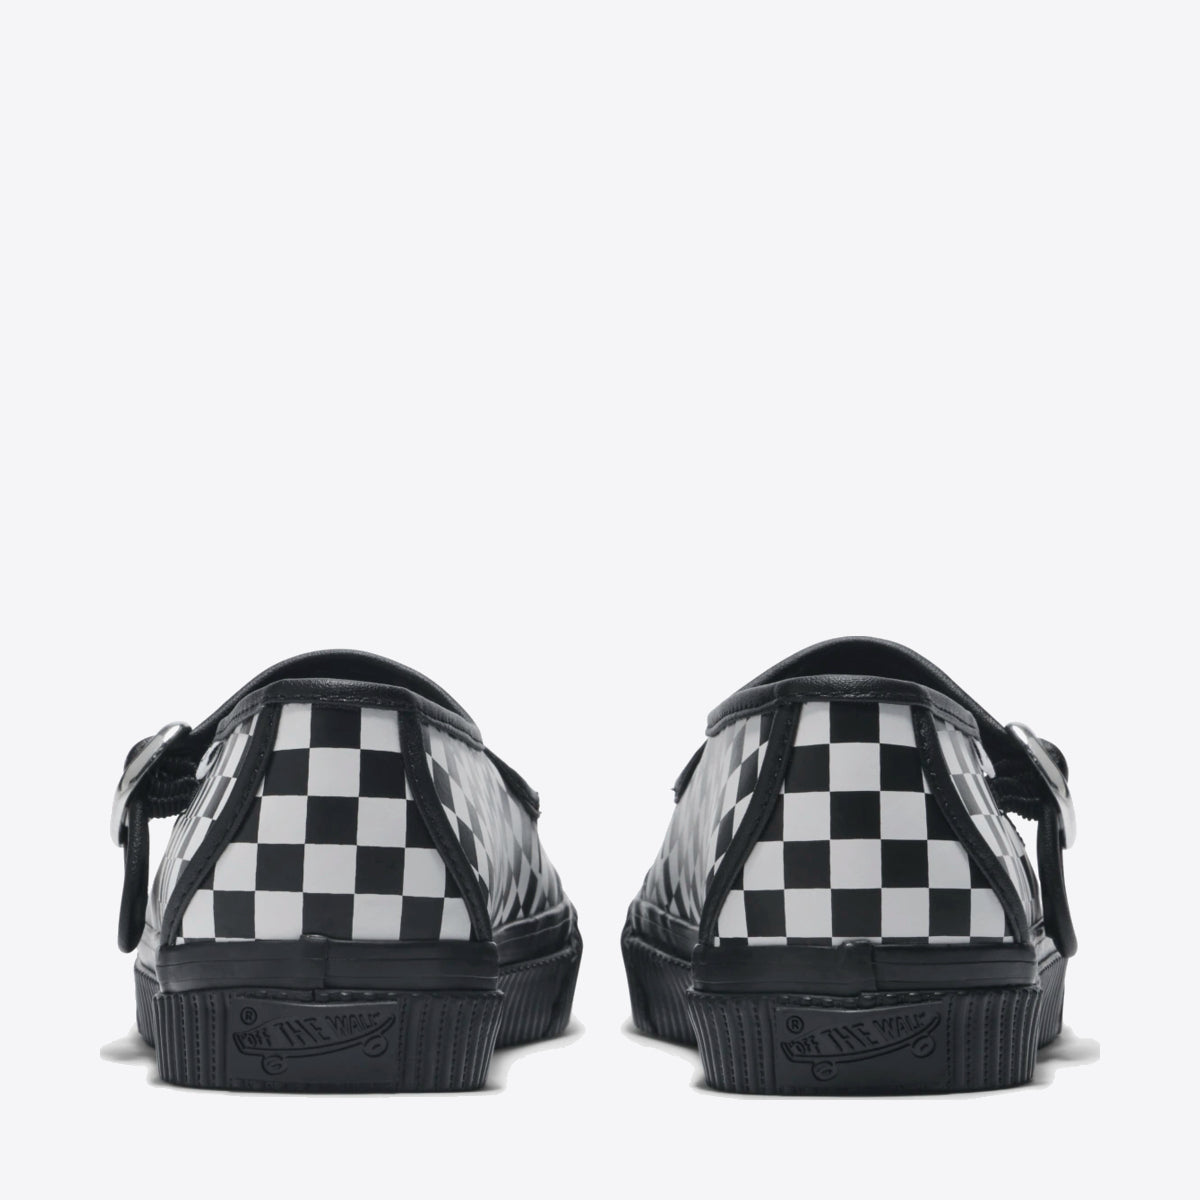 VANS Mary Jane LX Leather Creep Checkerboard Leather Checkerboard - Image 4